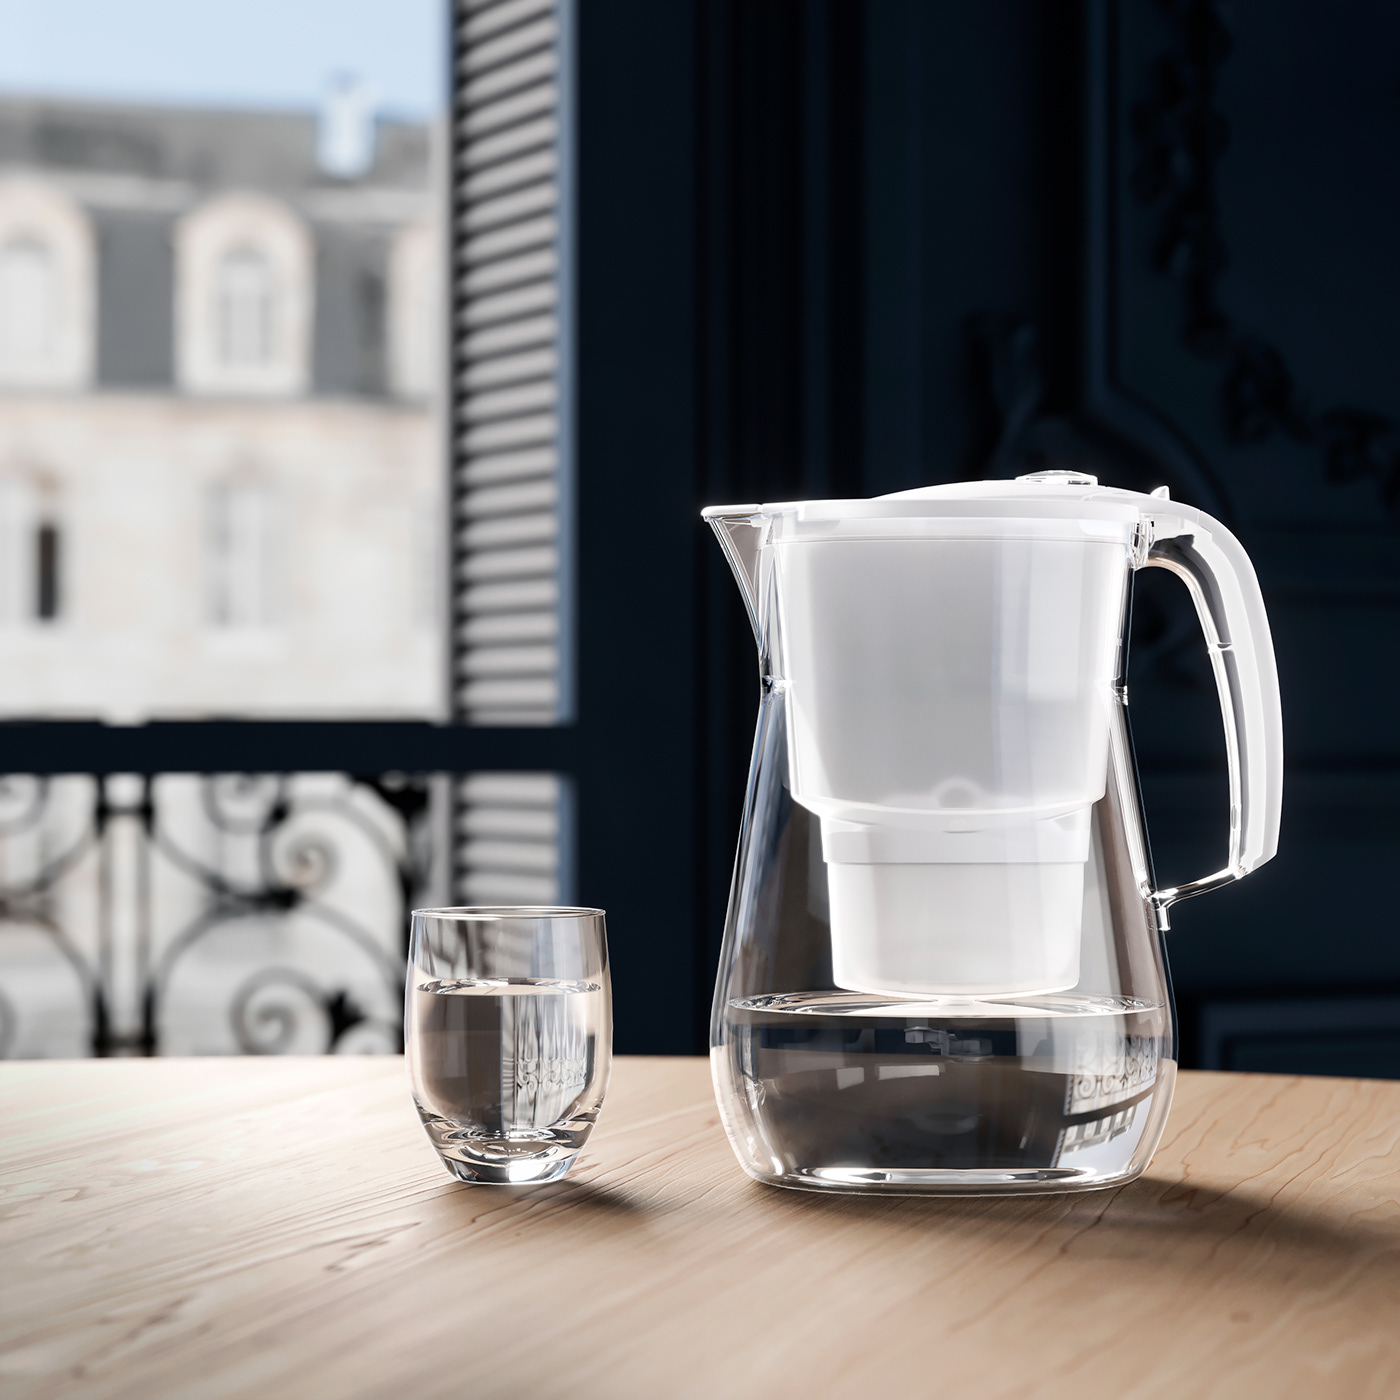 pitcher water Water Filter glass photorealistic 3D Render visualization product Interior